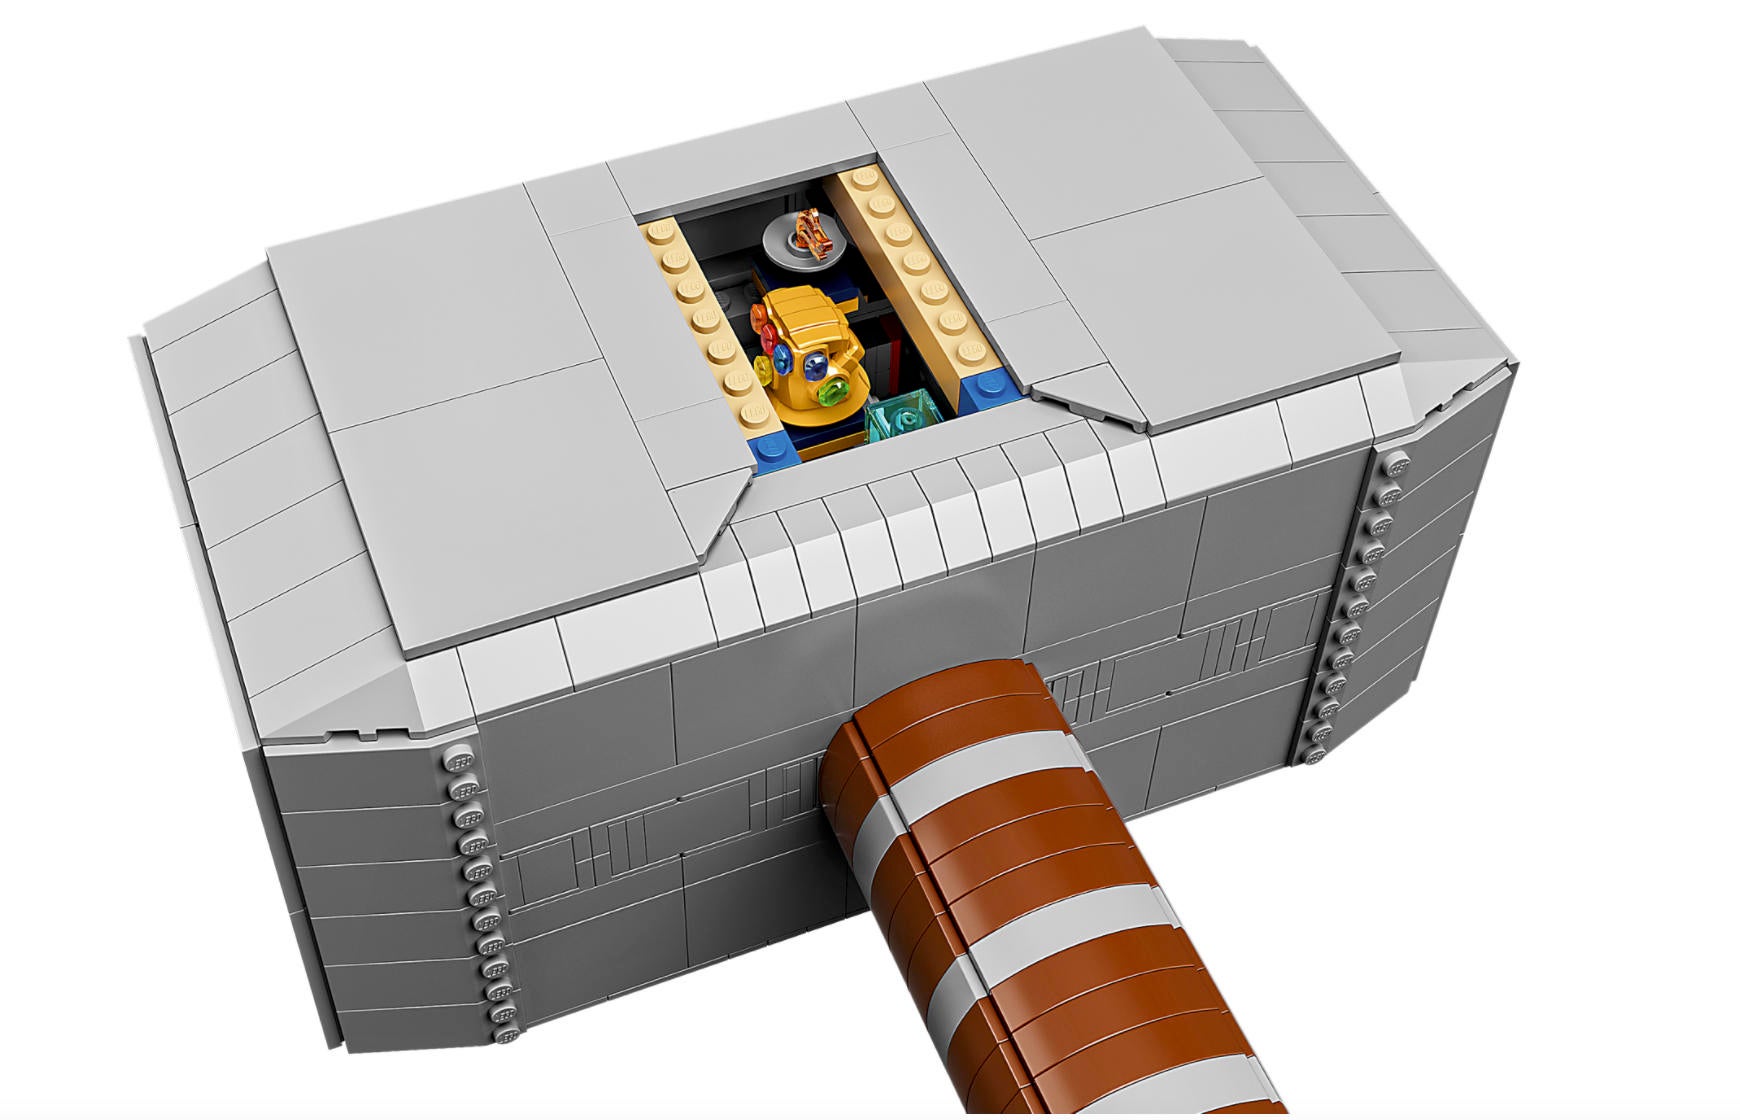 Thor's Hammer LEGO Set Is Now